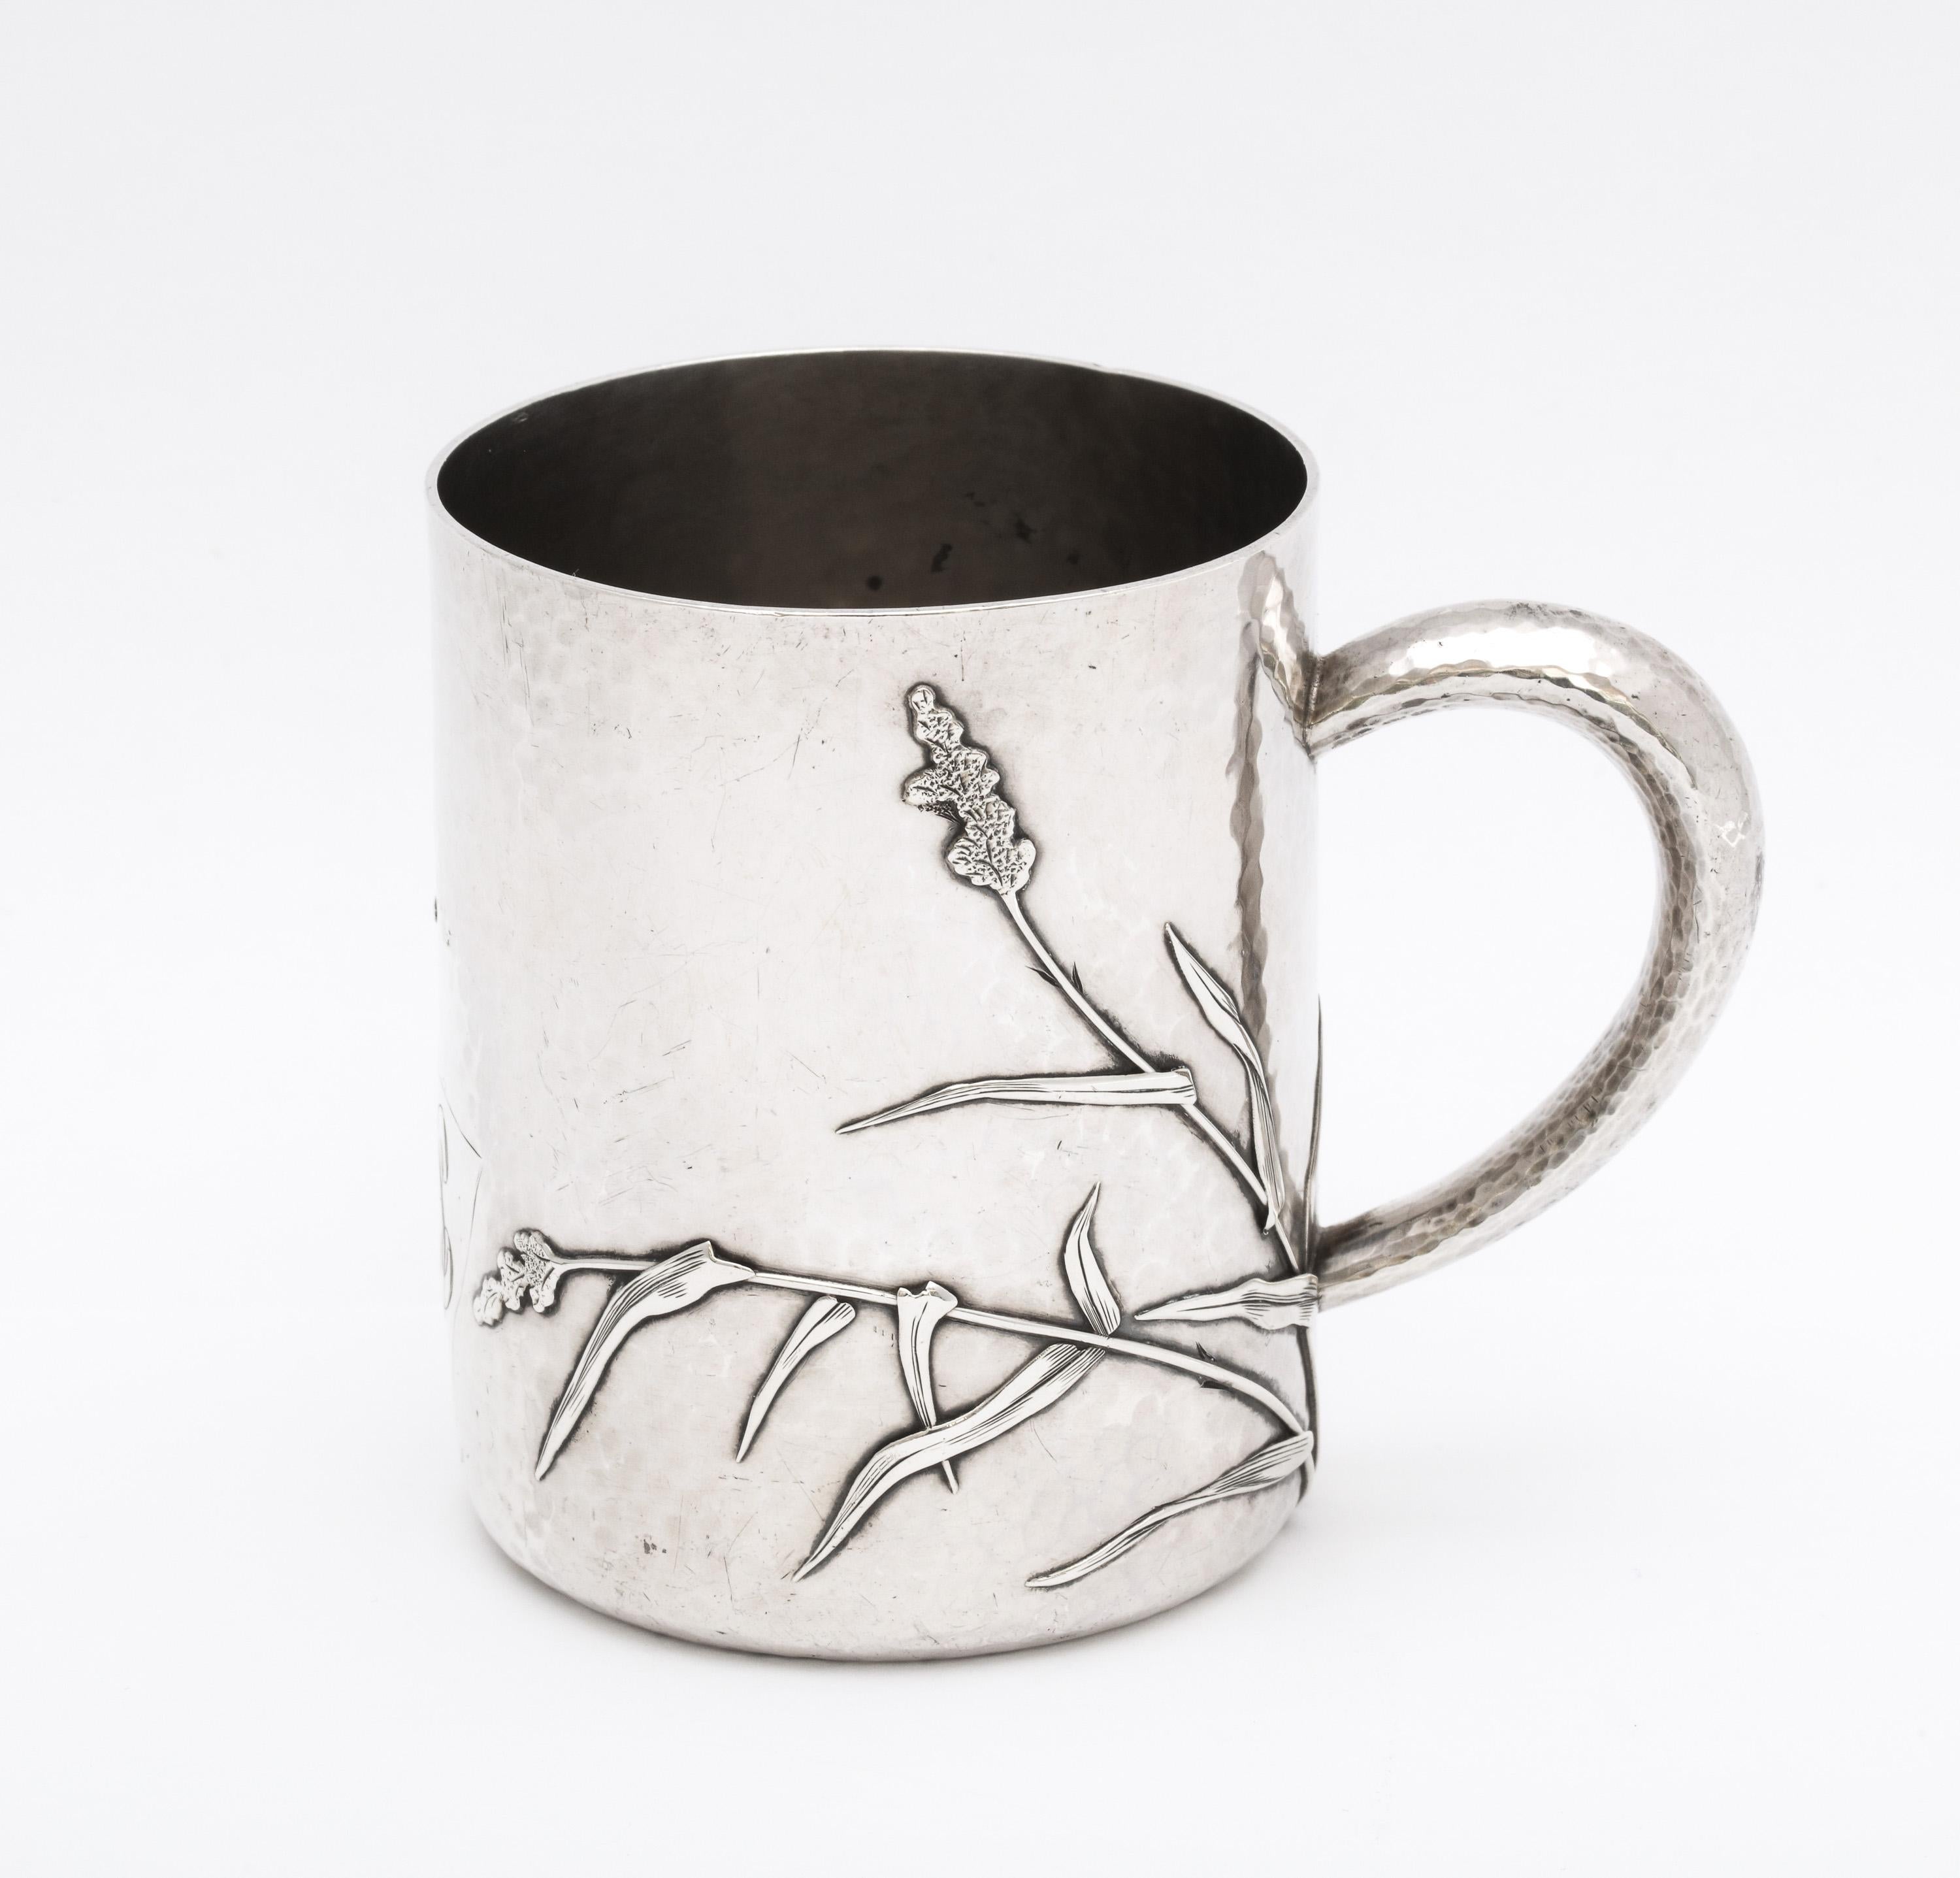 Sterling silver. Aesthetic Movement cup/mug, Providence, Rhode Island, Ca. 1870's, Whiting Manufacturing Co. - makers. Decorated with dragonflies; lightly hammered. Has a script monogram. Measures 3 1/4 inches high x 2 3/4 inches diameter x 3 3/4